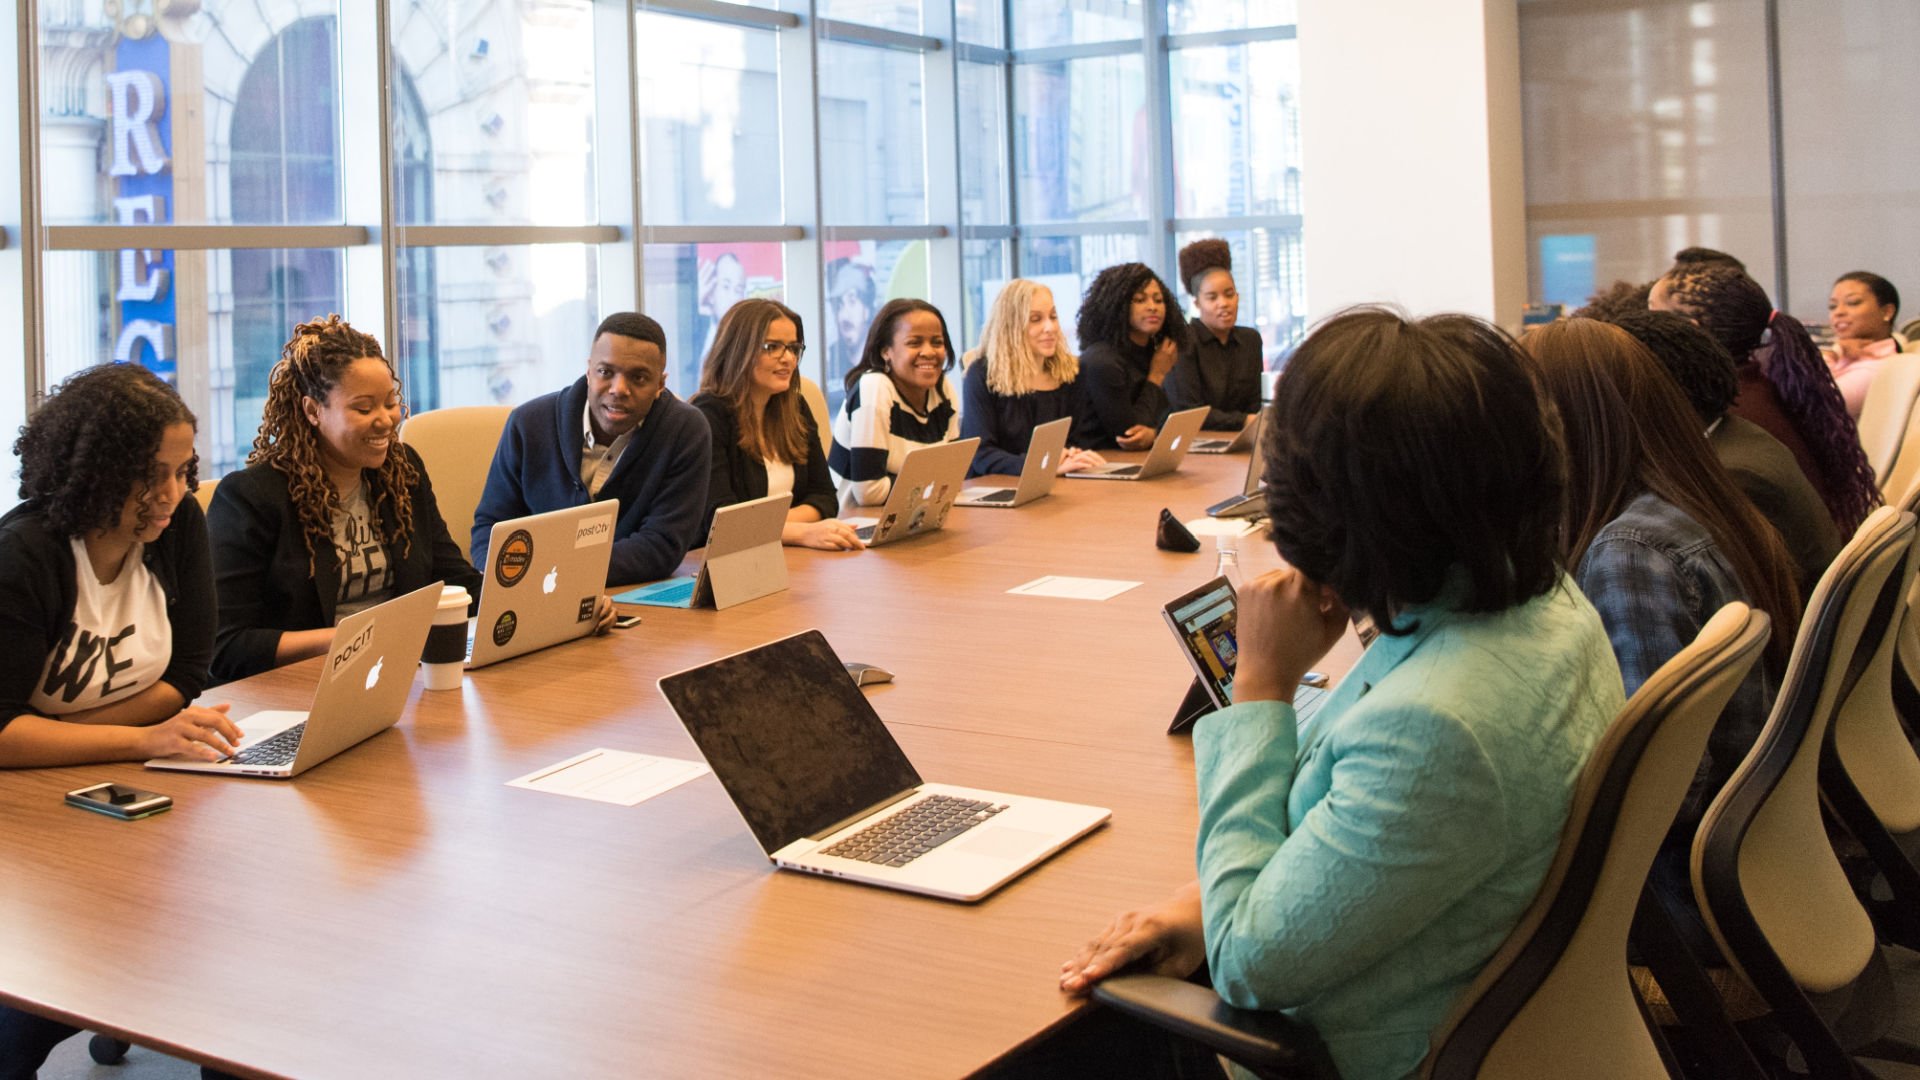 Fifteen young professionals seated at conference table smiling and collaborating 